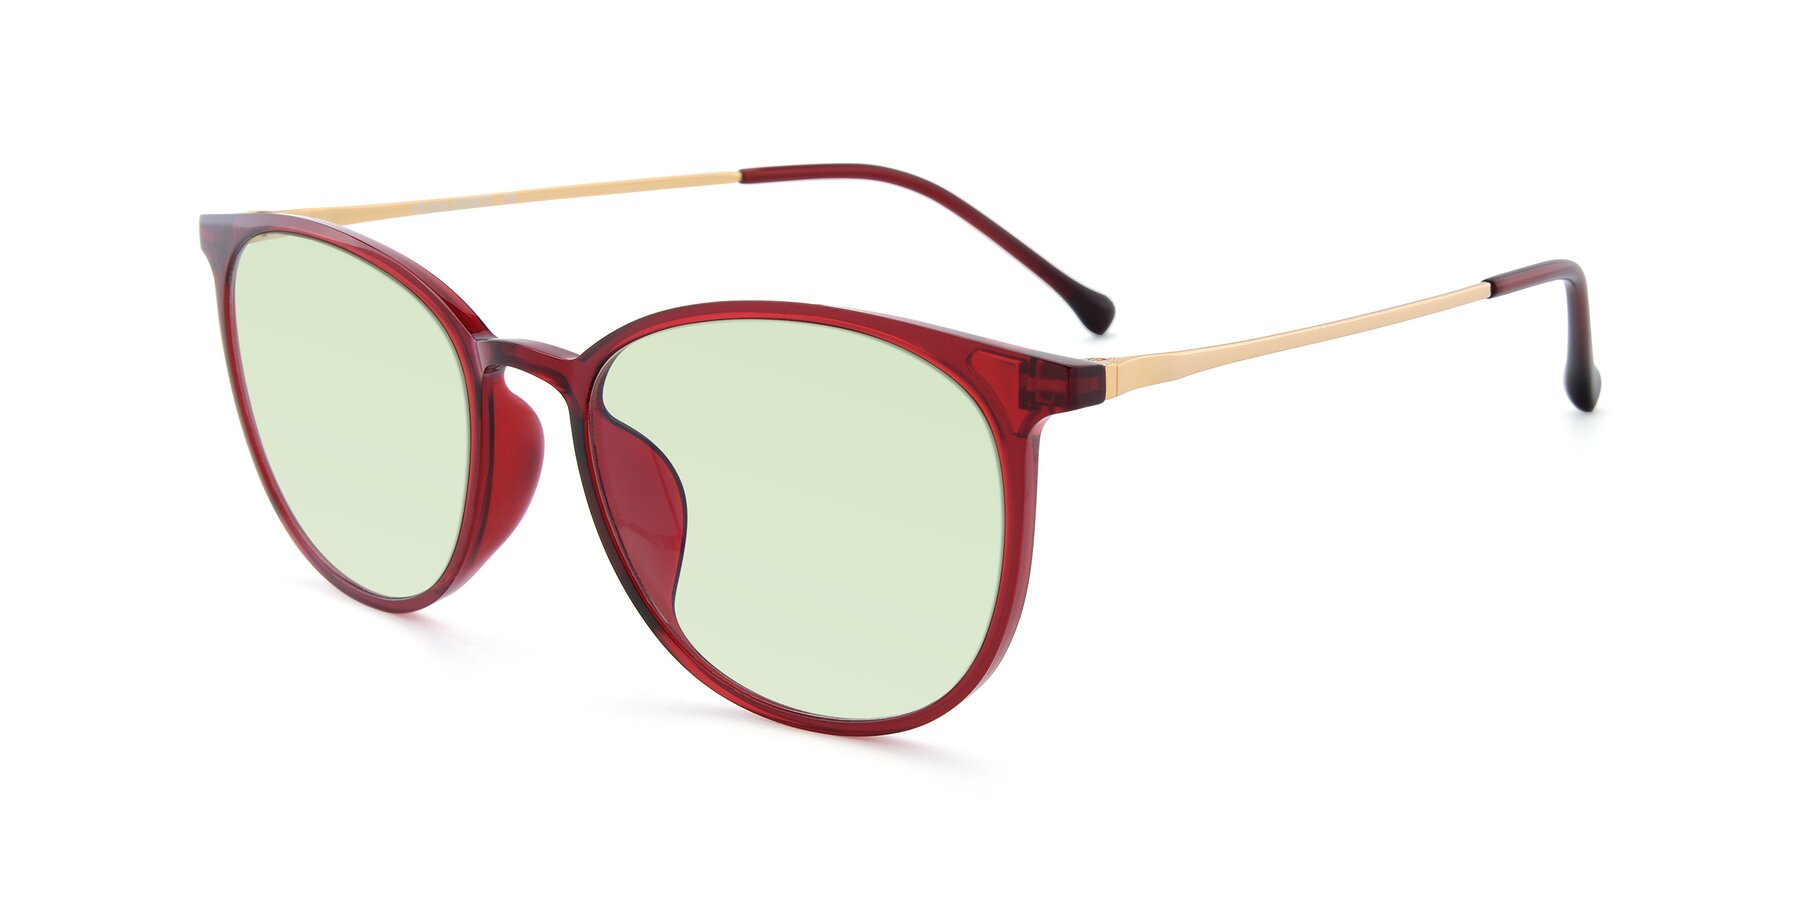 Angle of XC-6006 in Wine-Gold with Light Green Tinted Lenses